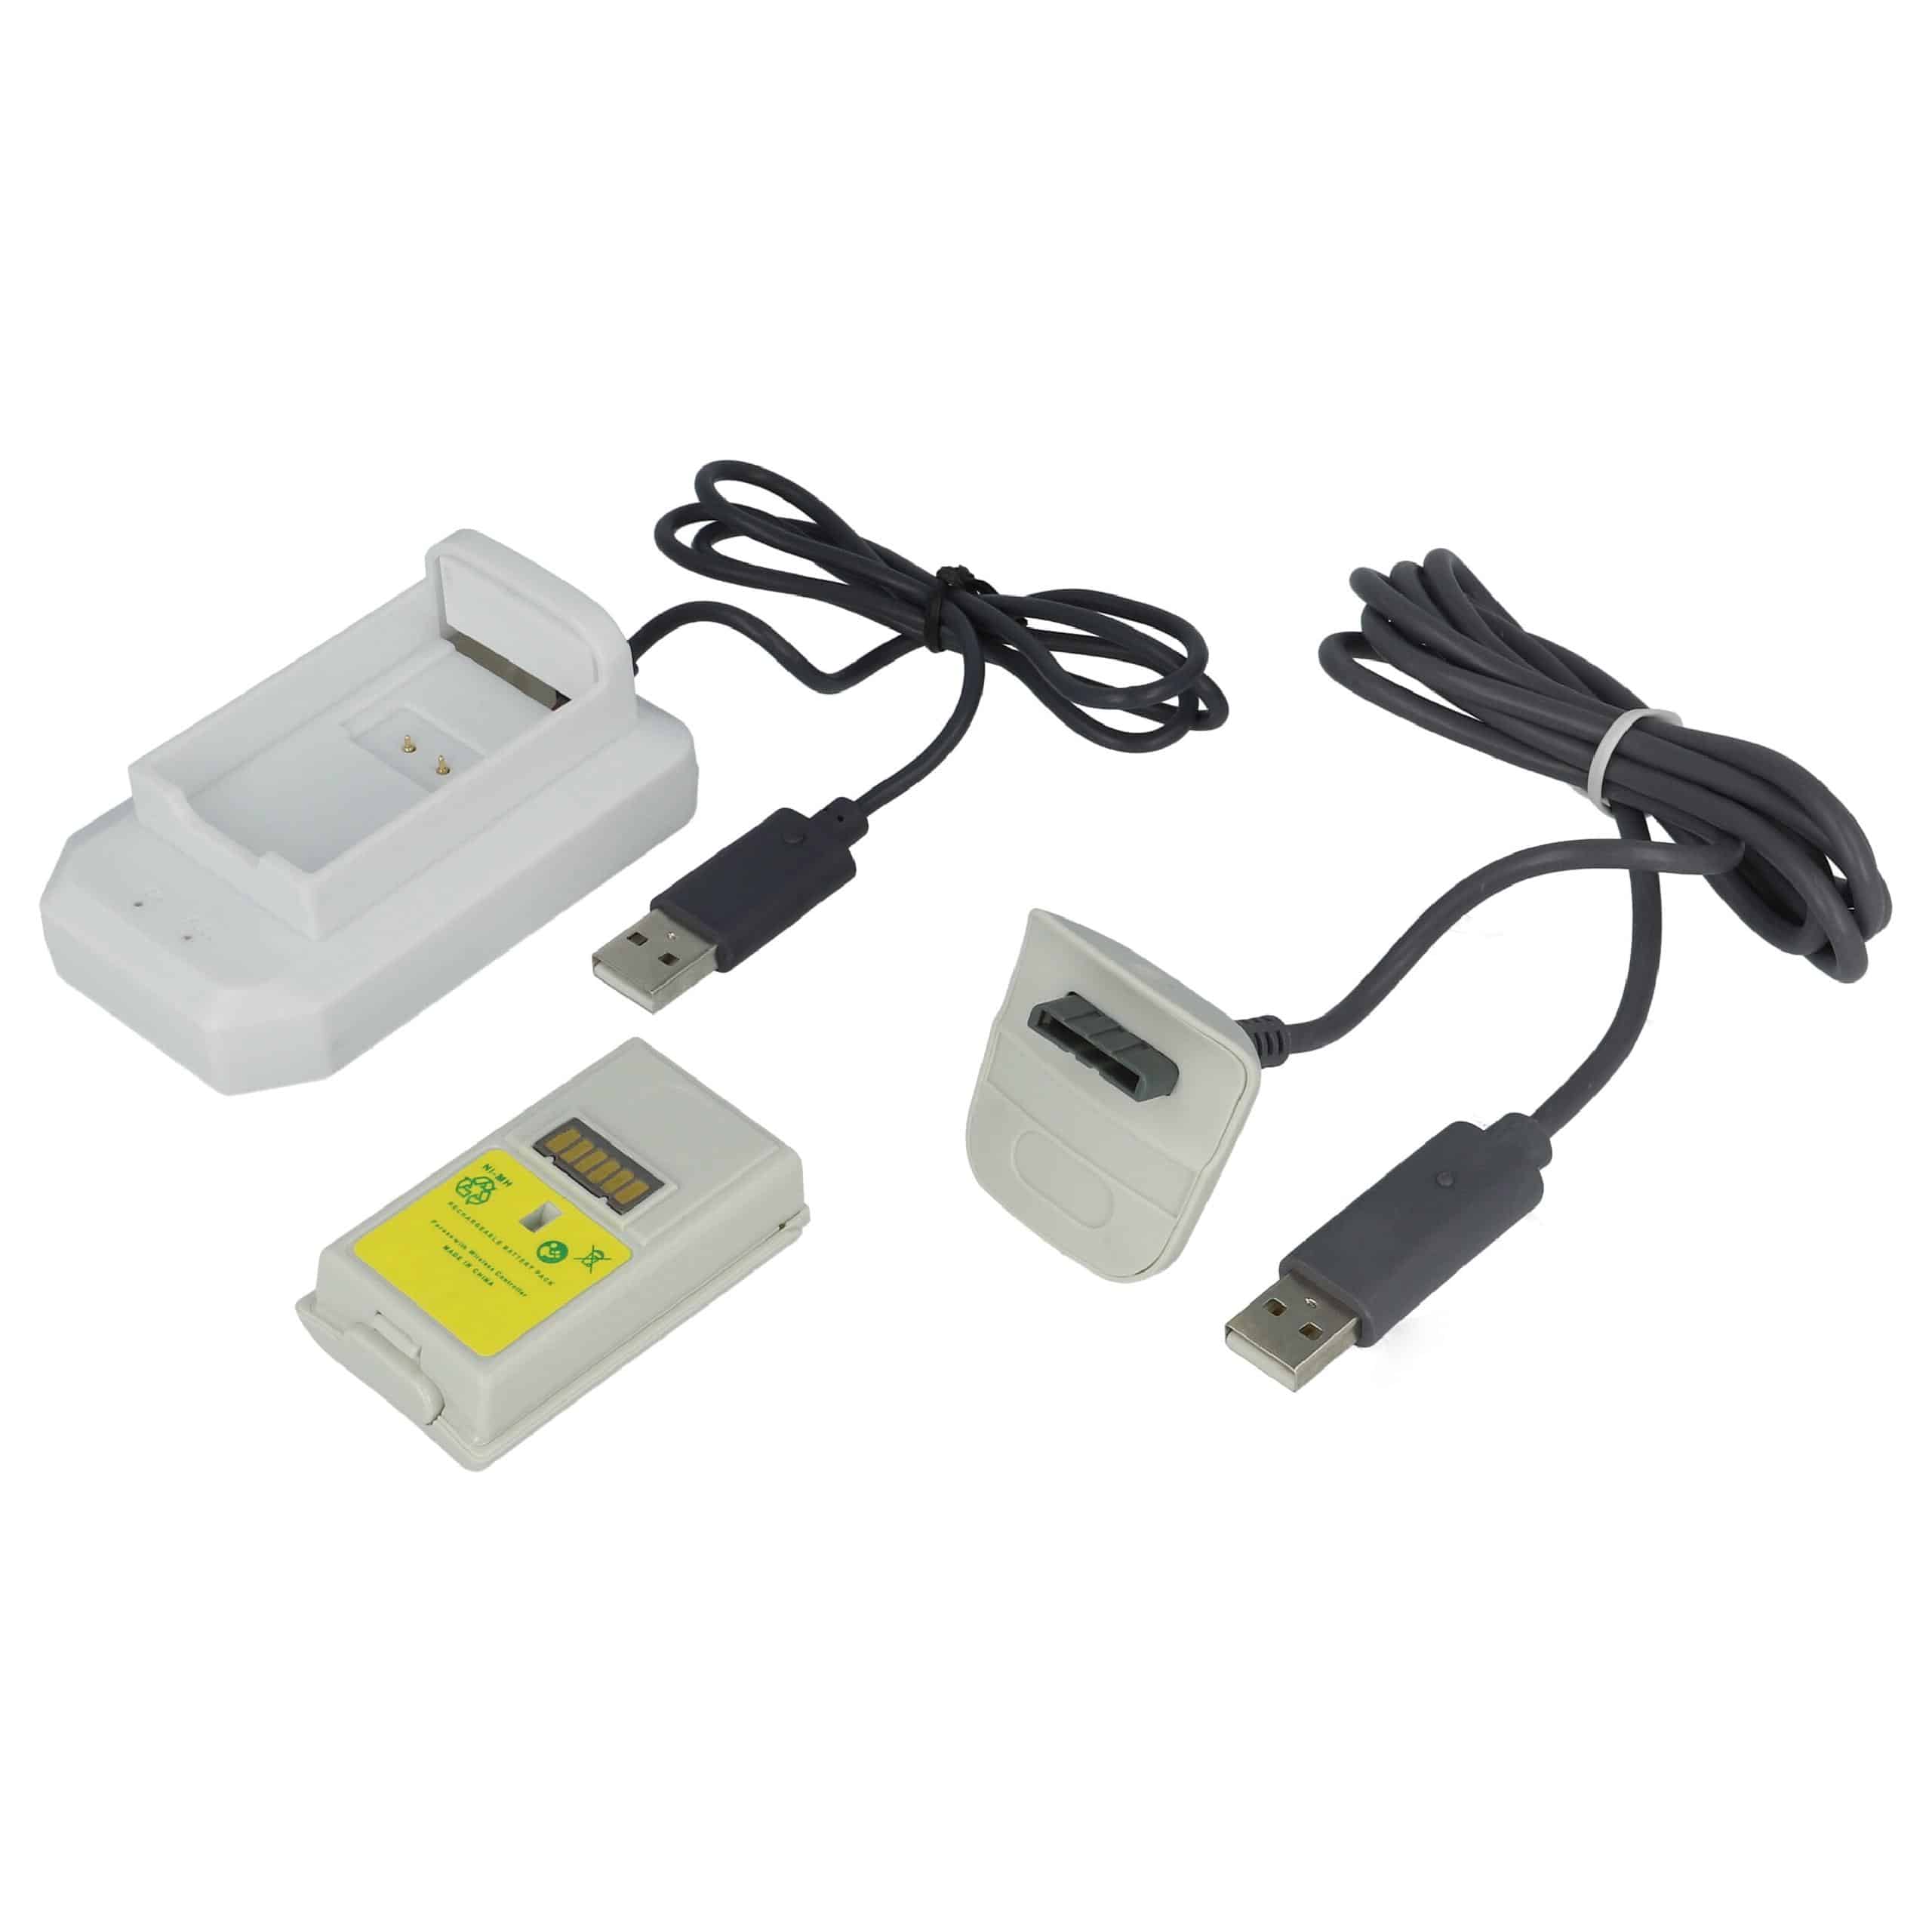 vhbw Play & Charge Kit - 1x charger, 1x charging cable, 1x battery Black Grey White